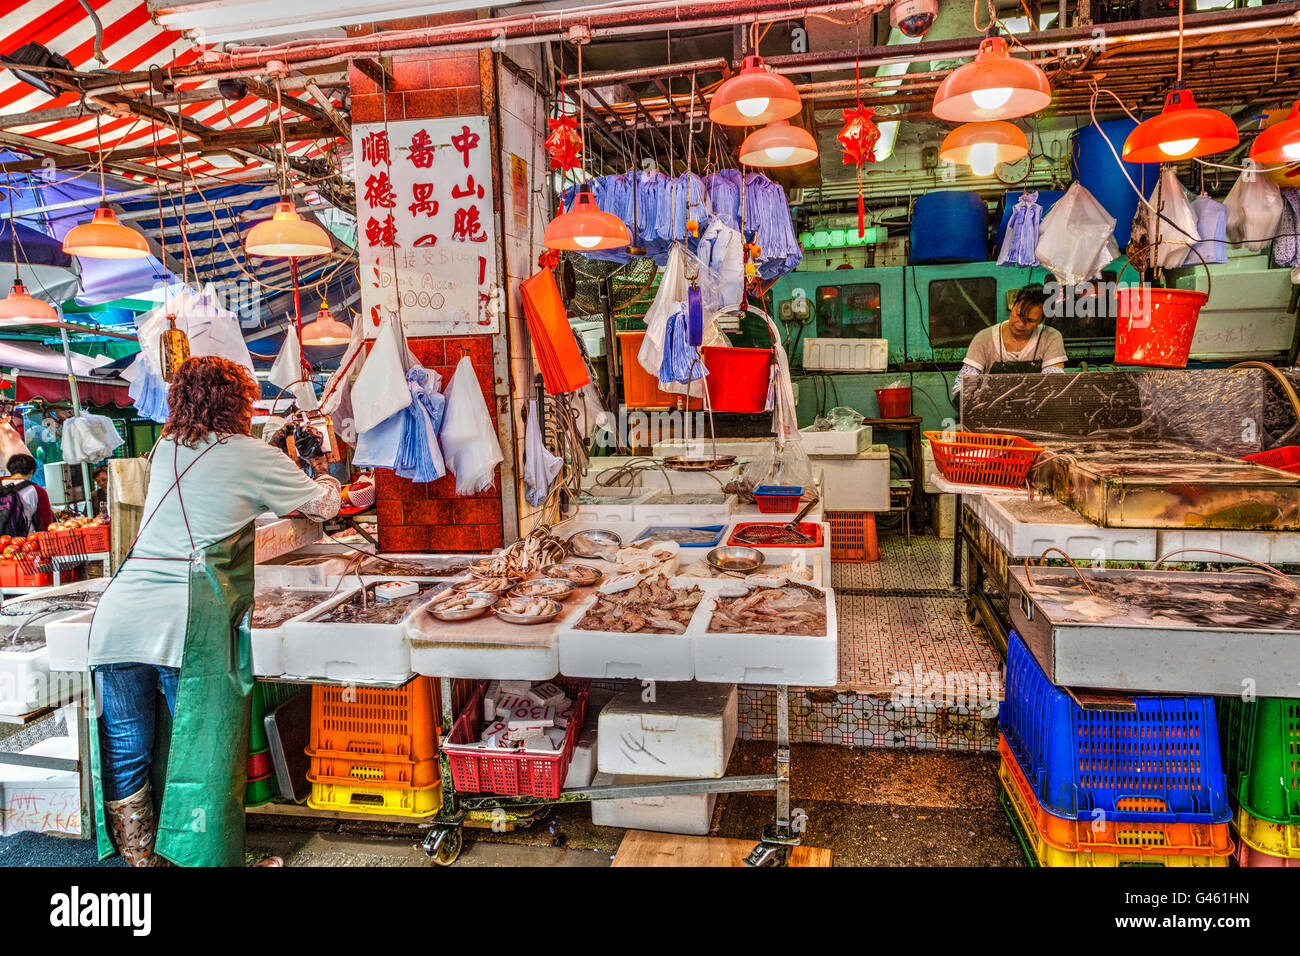 Hong Kong, China - March 30, 2015: Vendors of a live seafood store on Graham Street prepare their store for business in the Cent Stock Photo